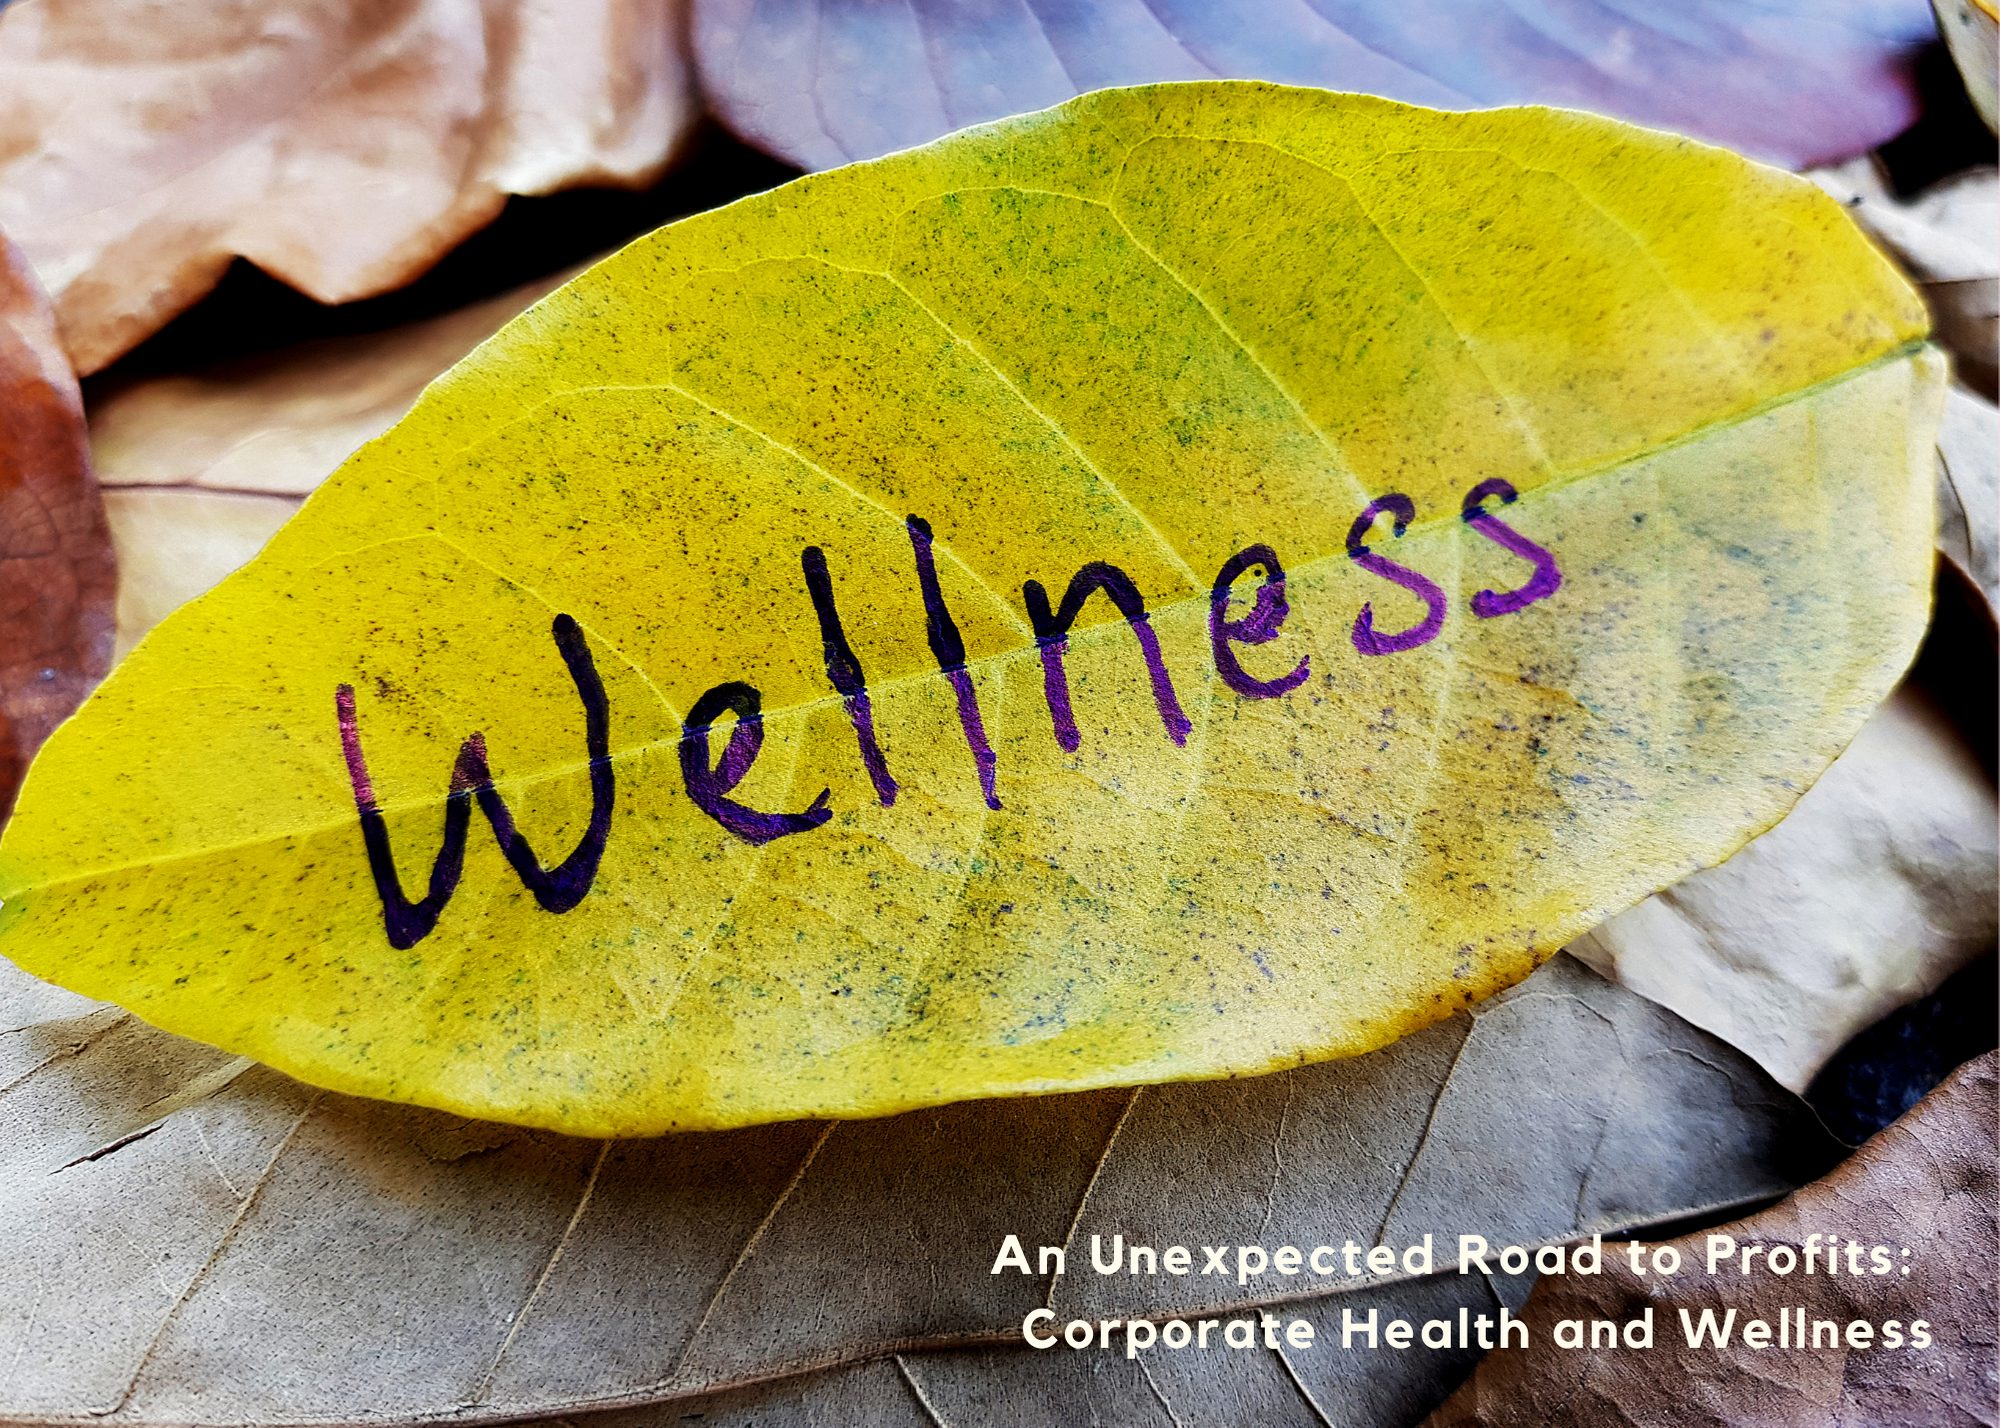 Featured image for “An Unexpected Road to Profits: Corporate Health and Wellness”